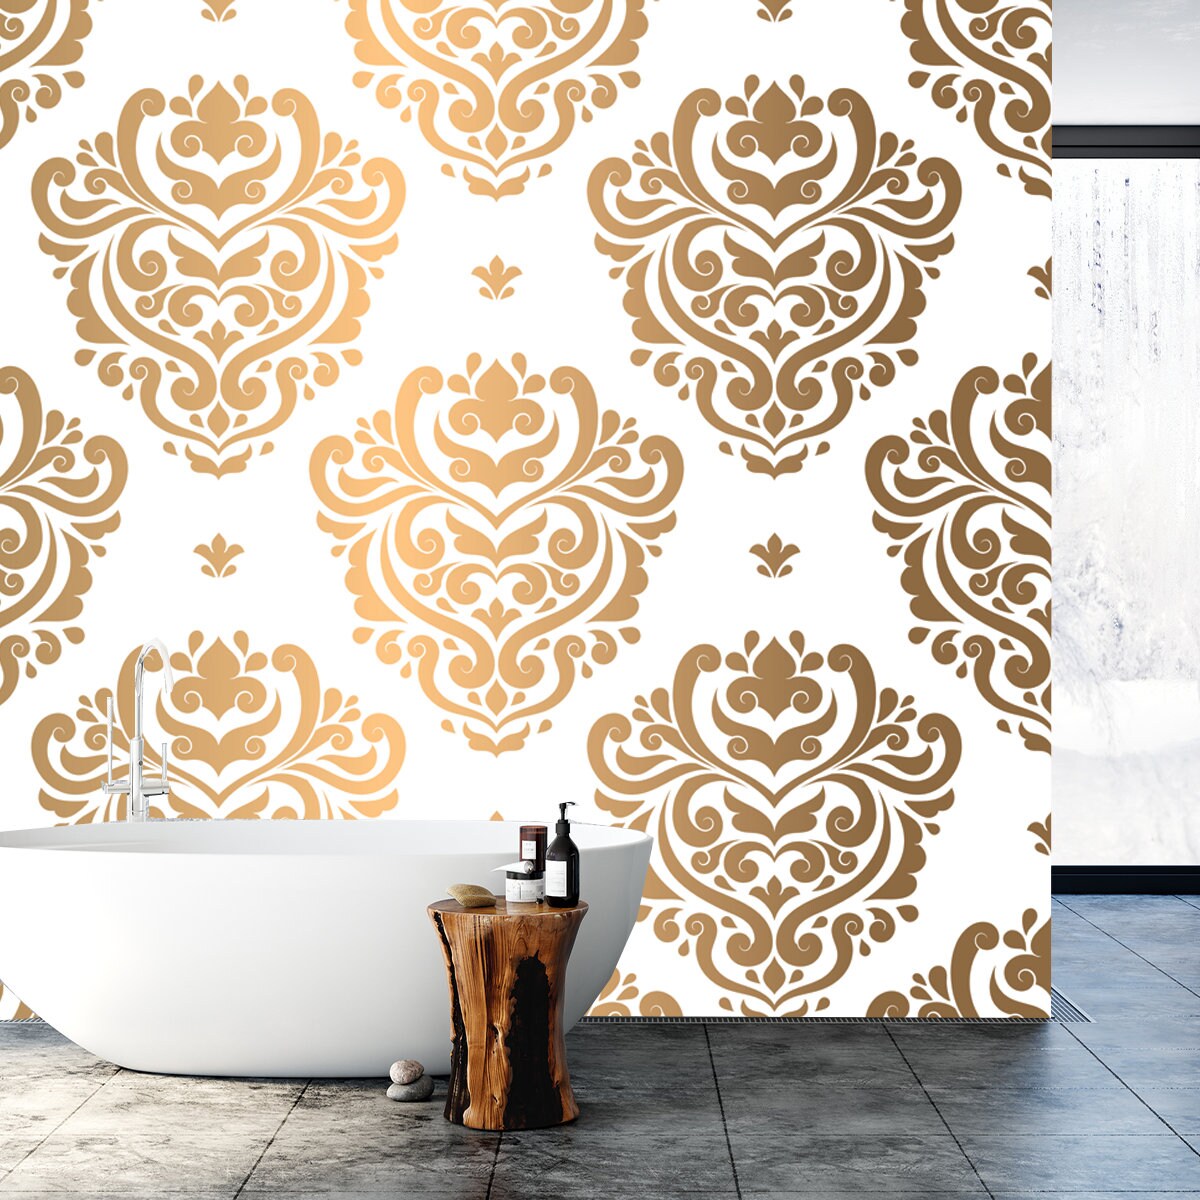 Gold and White Damask Pattern Wallpaper. Elegant Classic Texture. Royal, Victorian, Baroque Elements Wallpaper Bathroom Mural